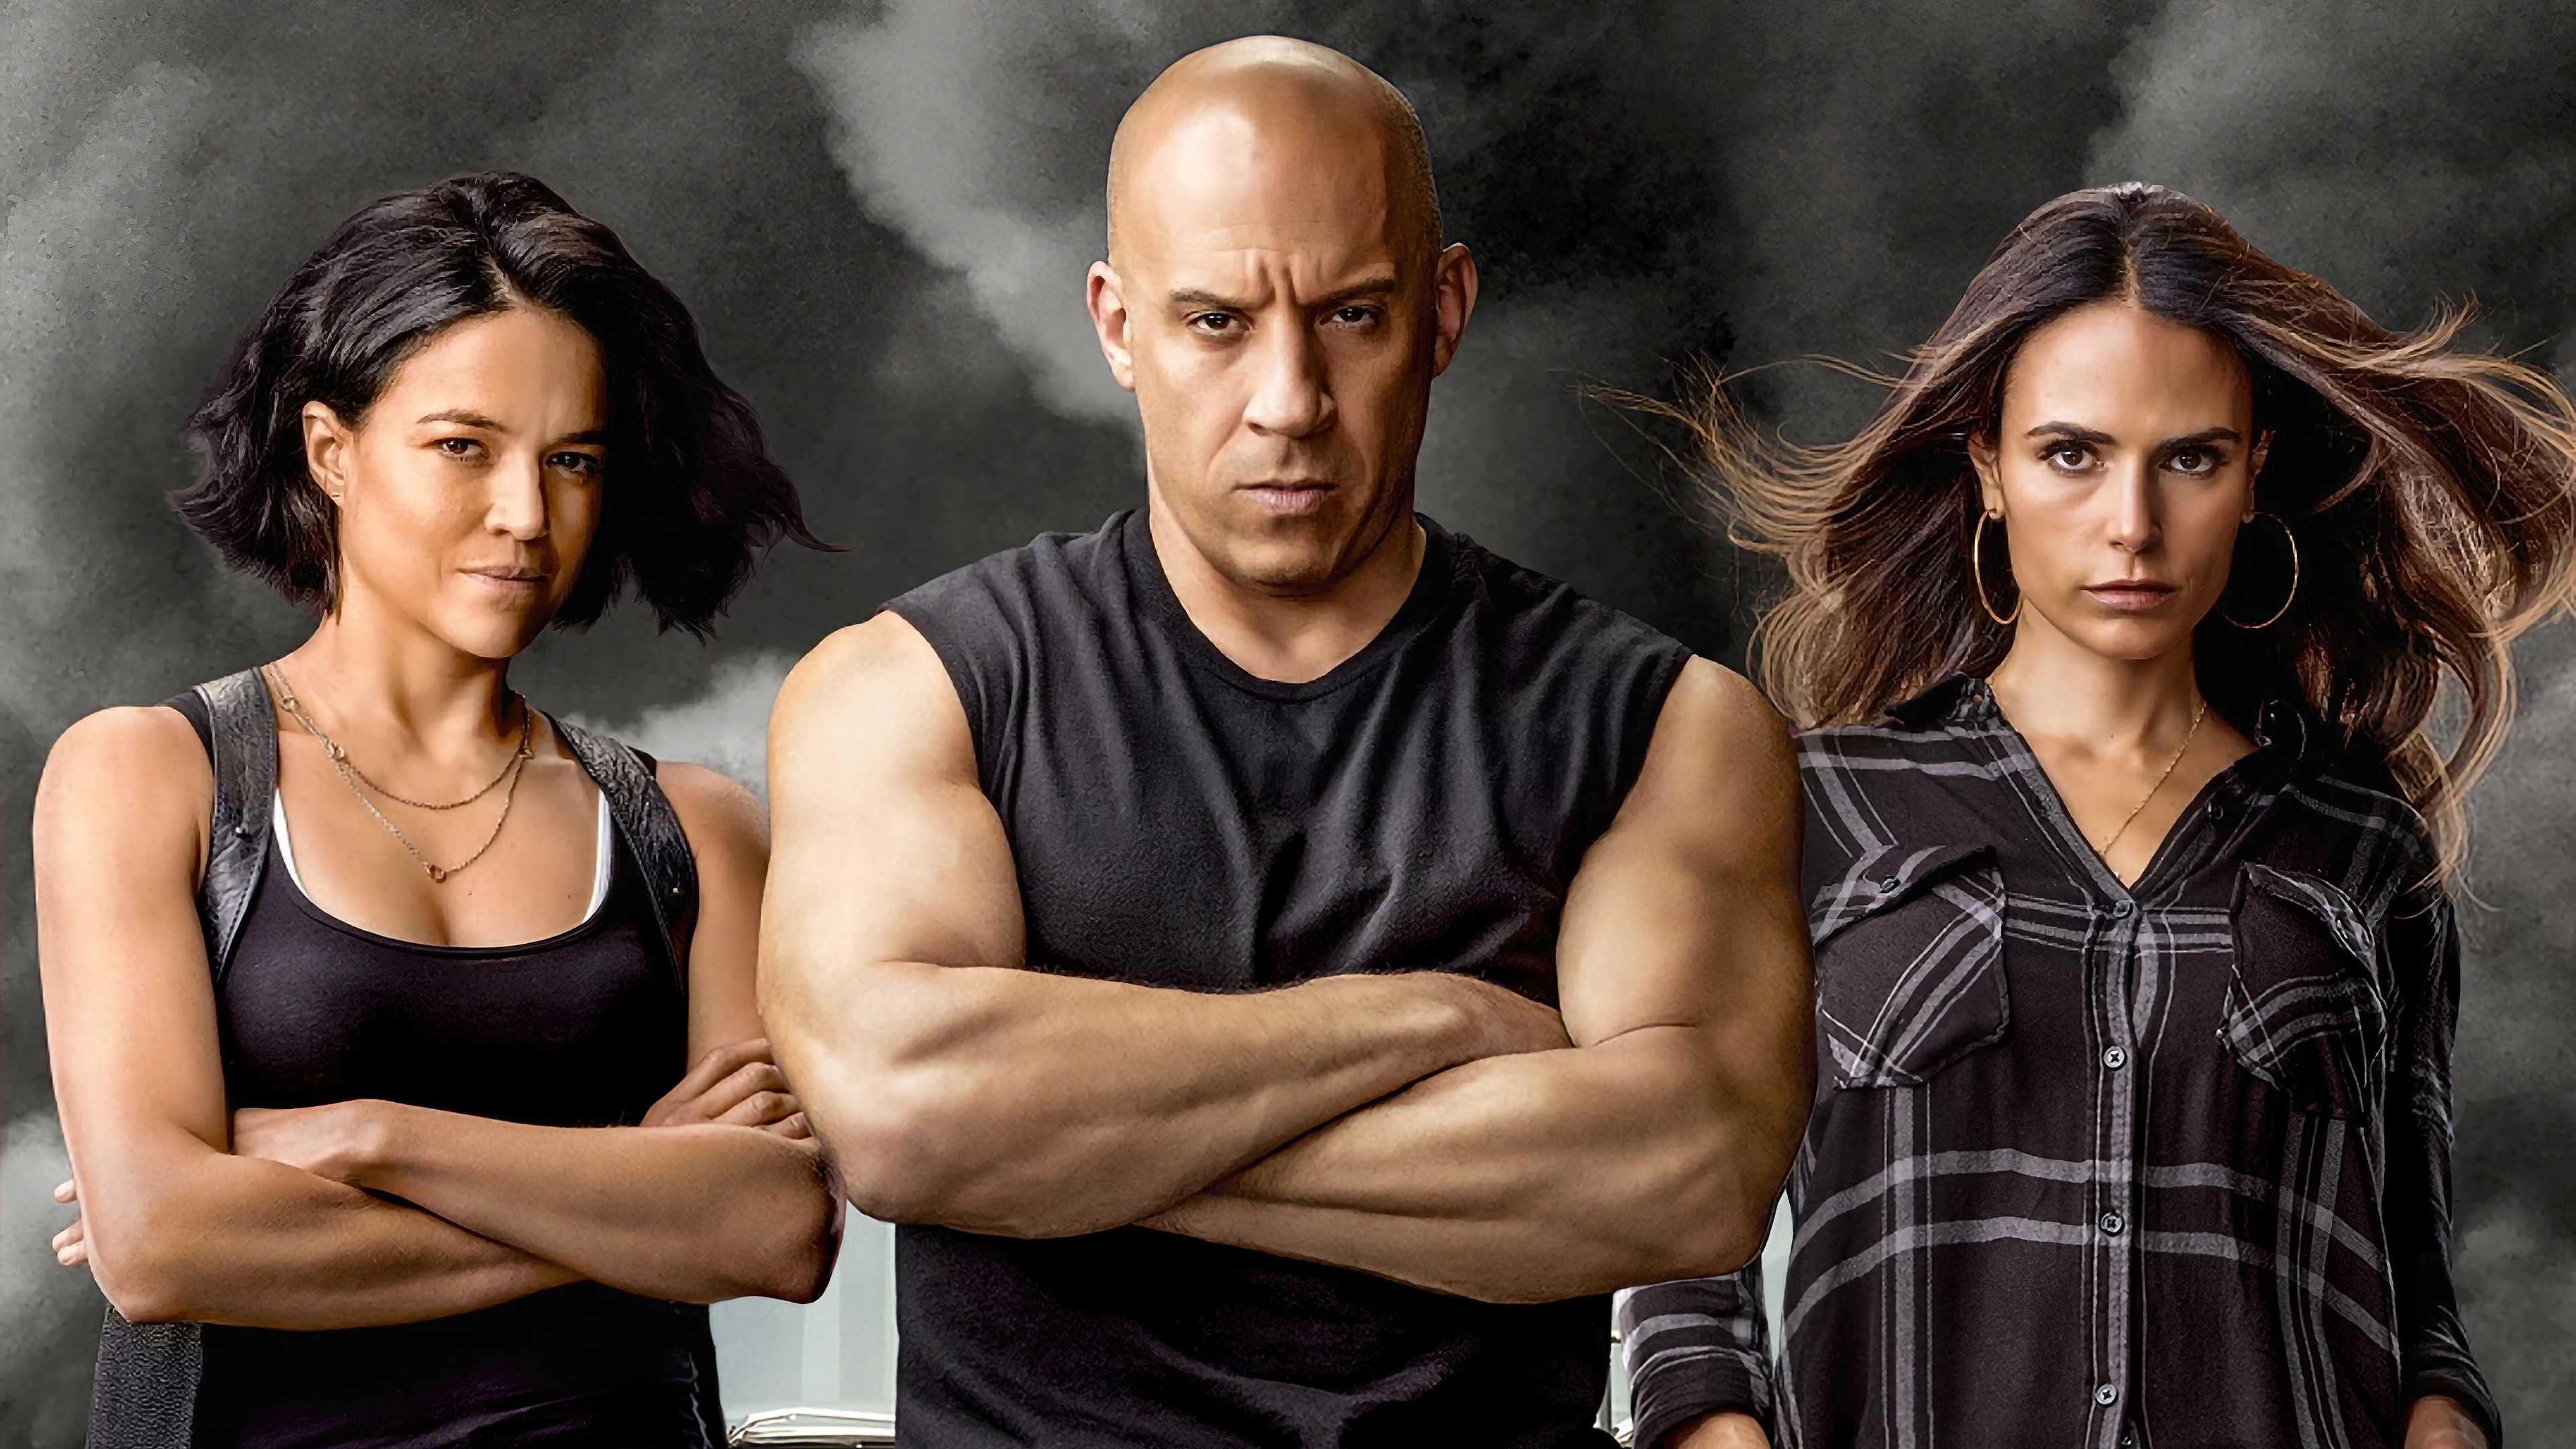 83 Wallpaper Hd Fast And Furious 9 For FREE - MyWeb